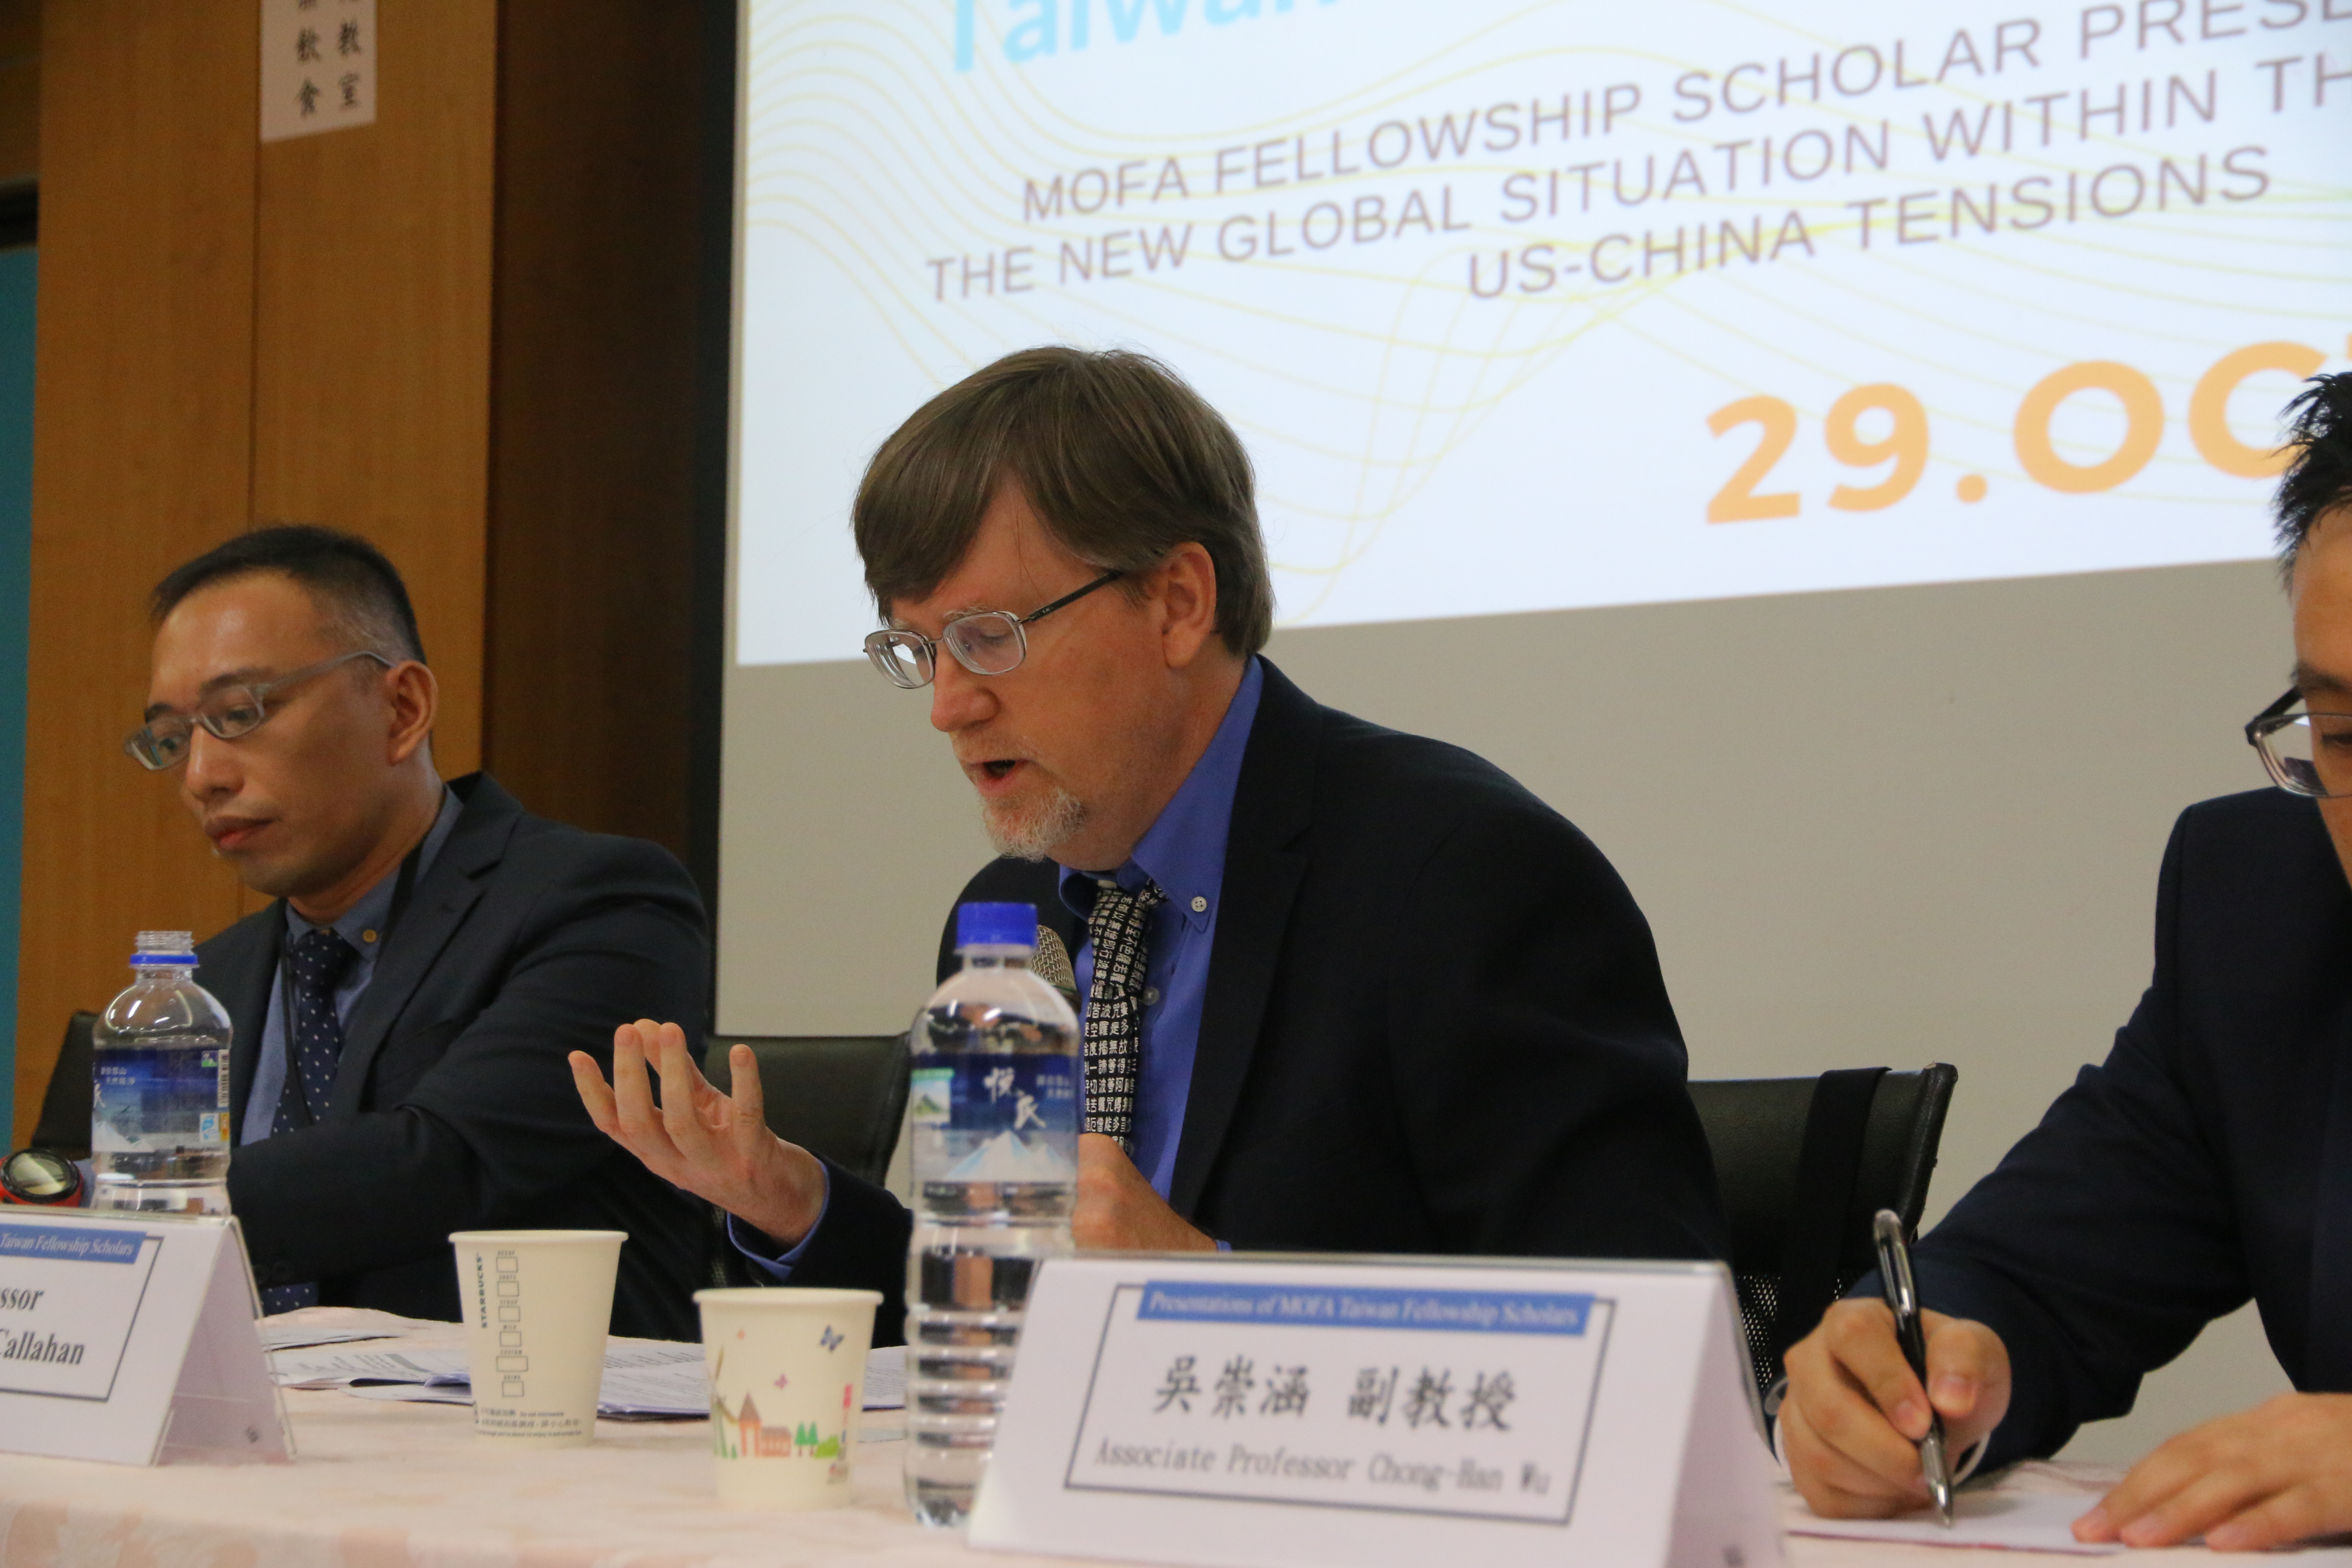 2020 Presentations of MOFA Taiwan Fellowship Scholars—The New Global Situation within the Context of US-China Tensions:picture15